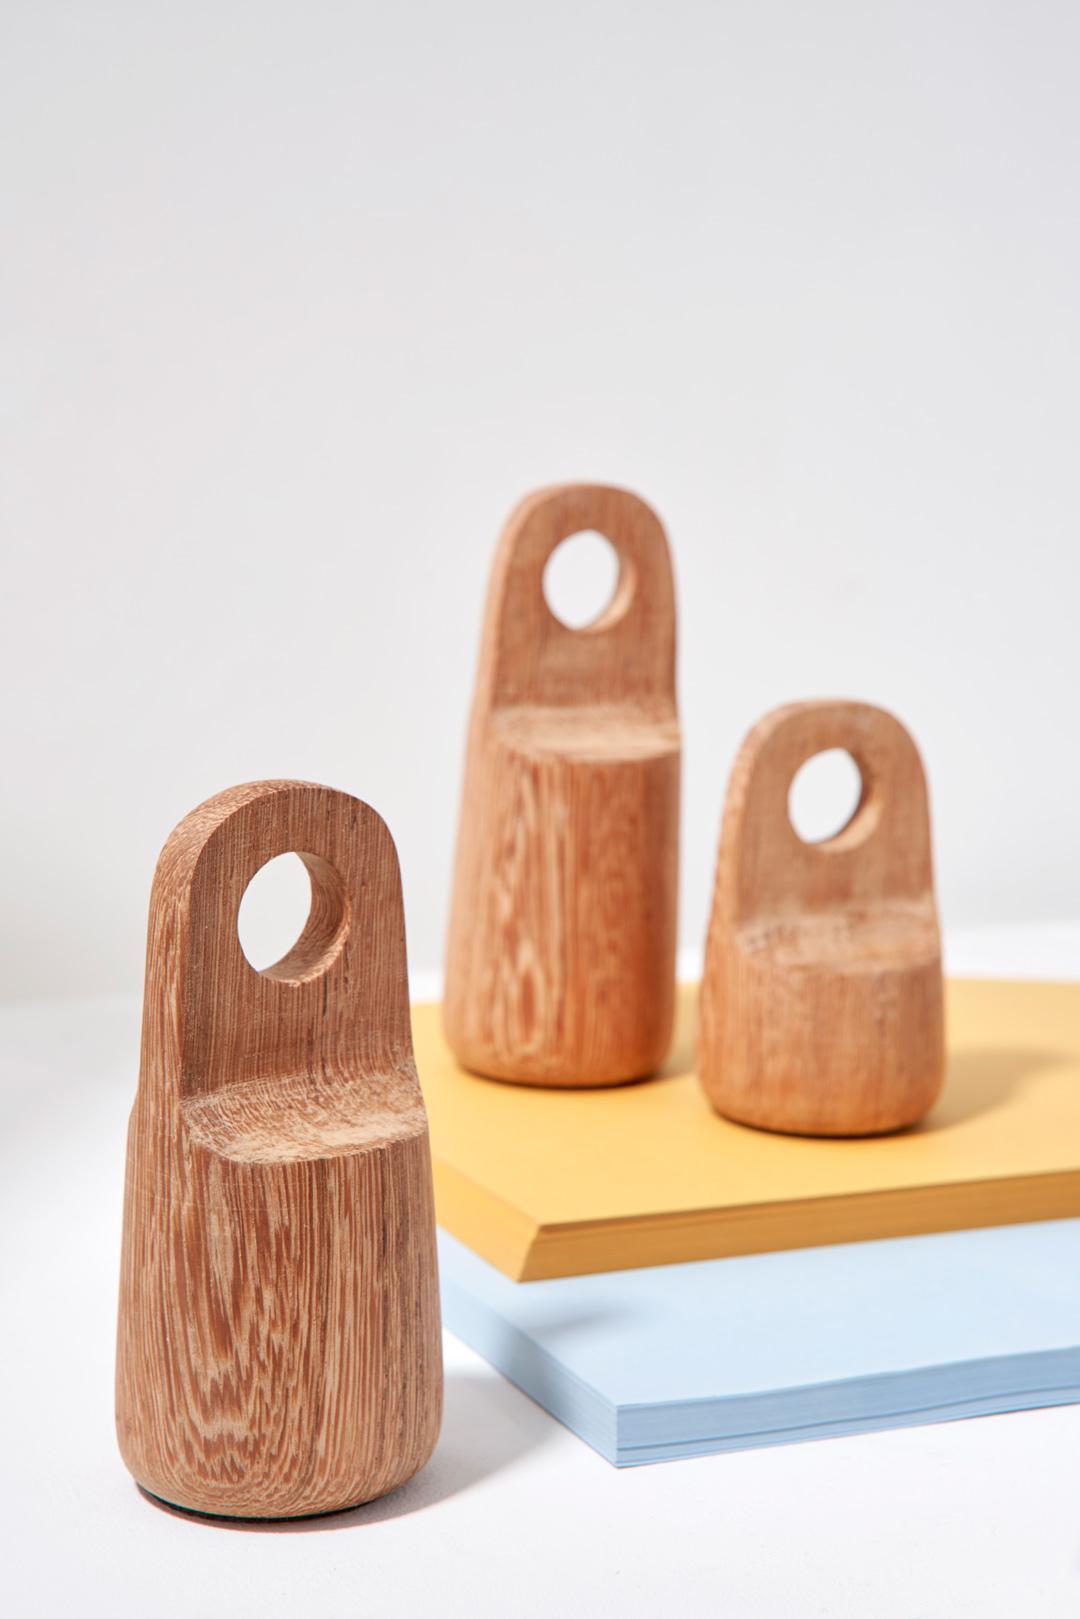 Minimalist Arturito Collection, Wood Paperweight Set (5 pieces) For Sale